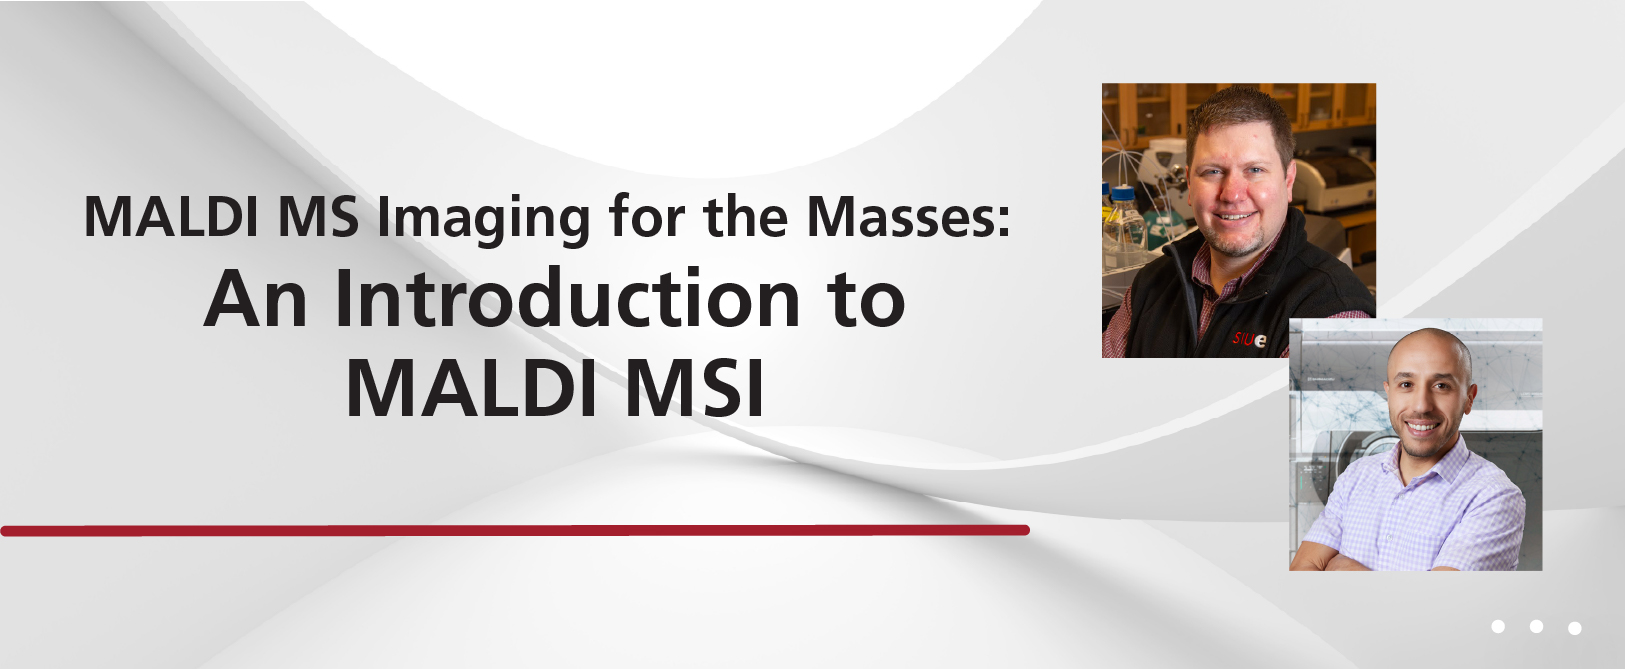 MALDI MS Imaging for the Masses: An Introduction to MALDI MSI